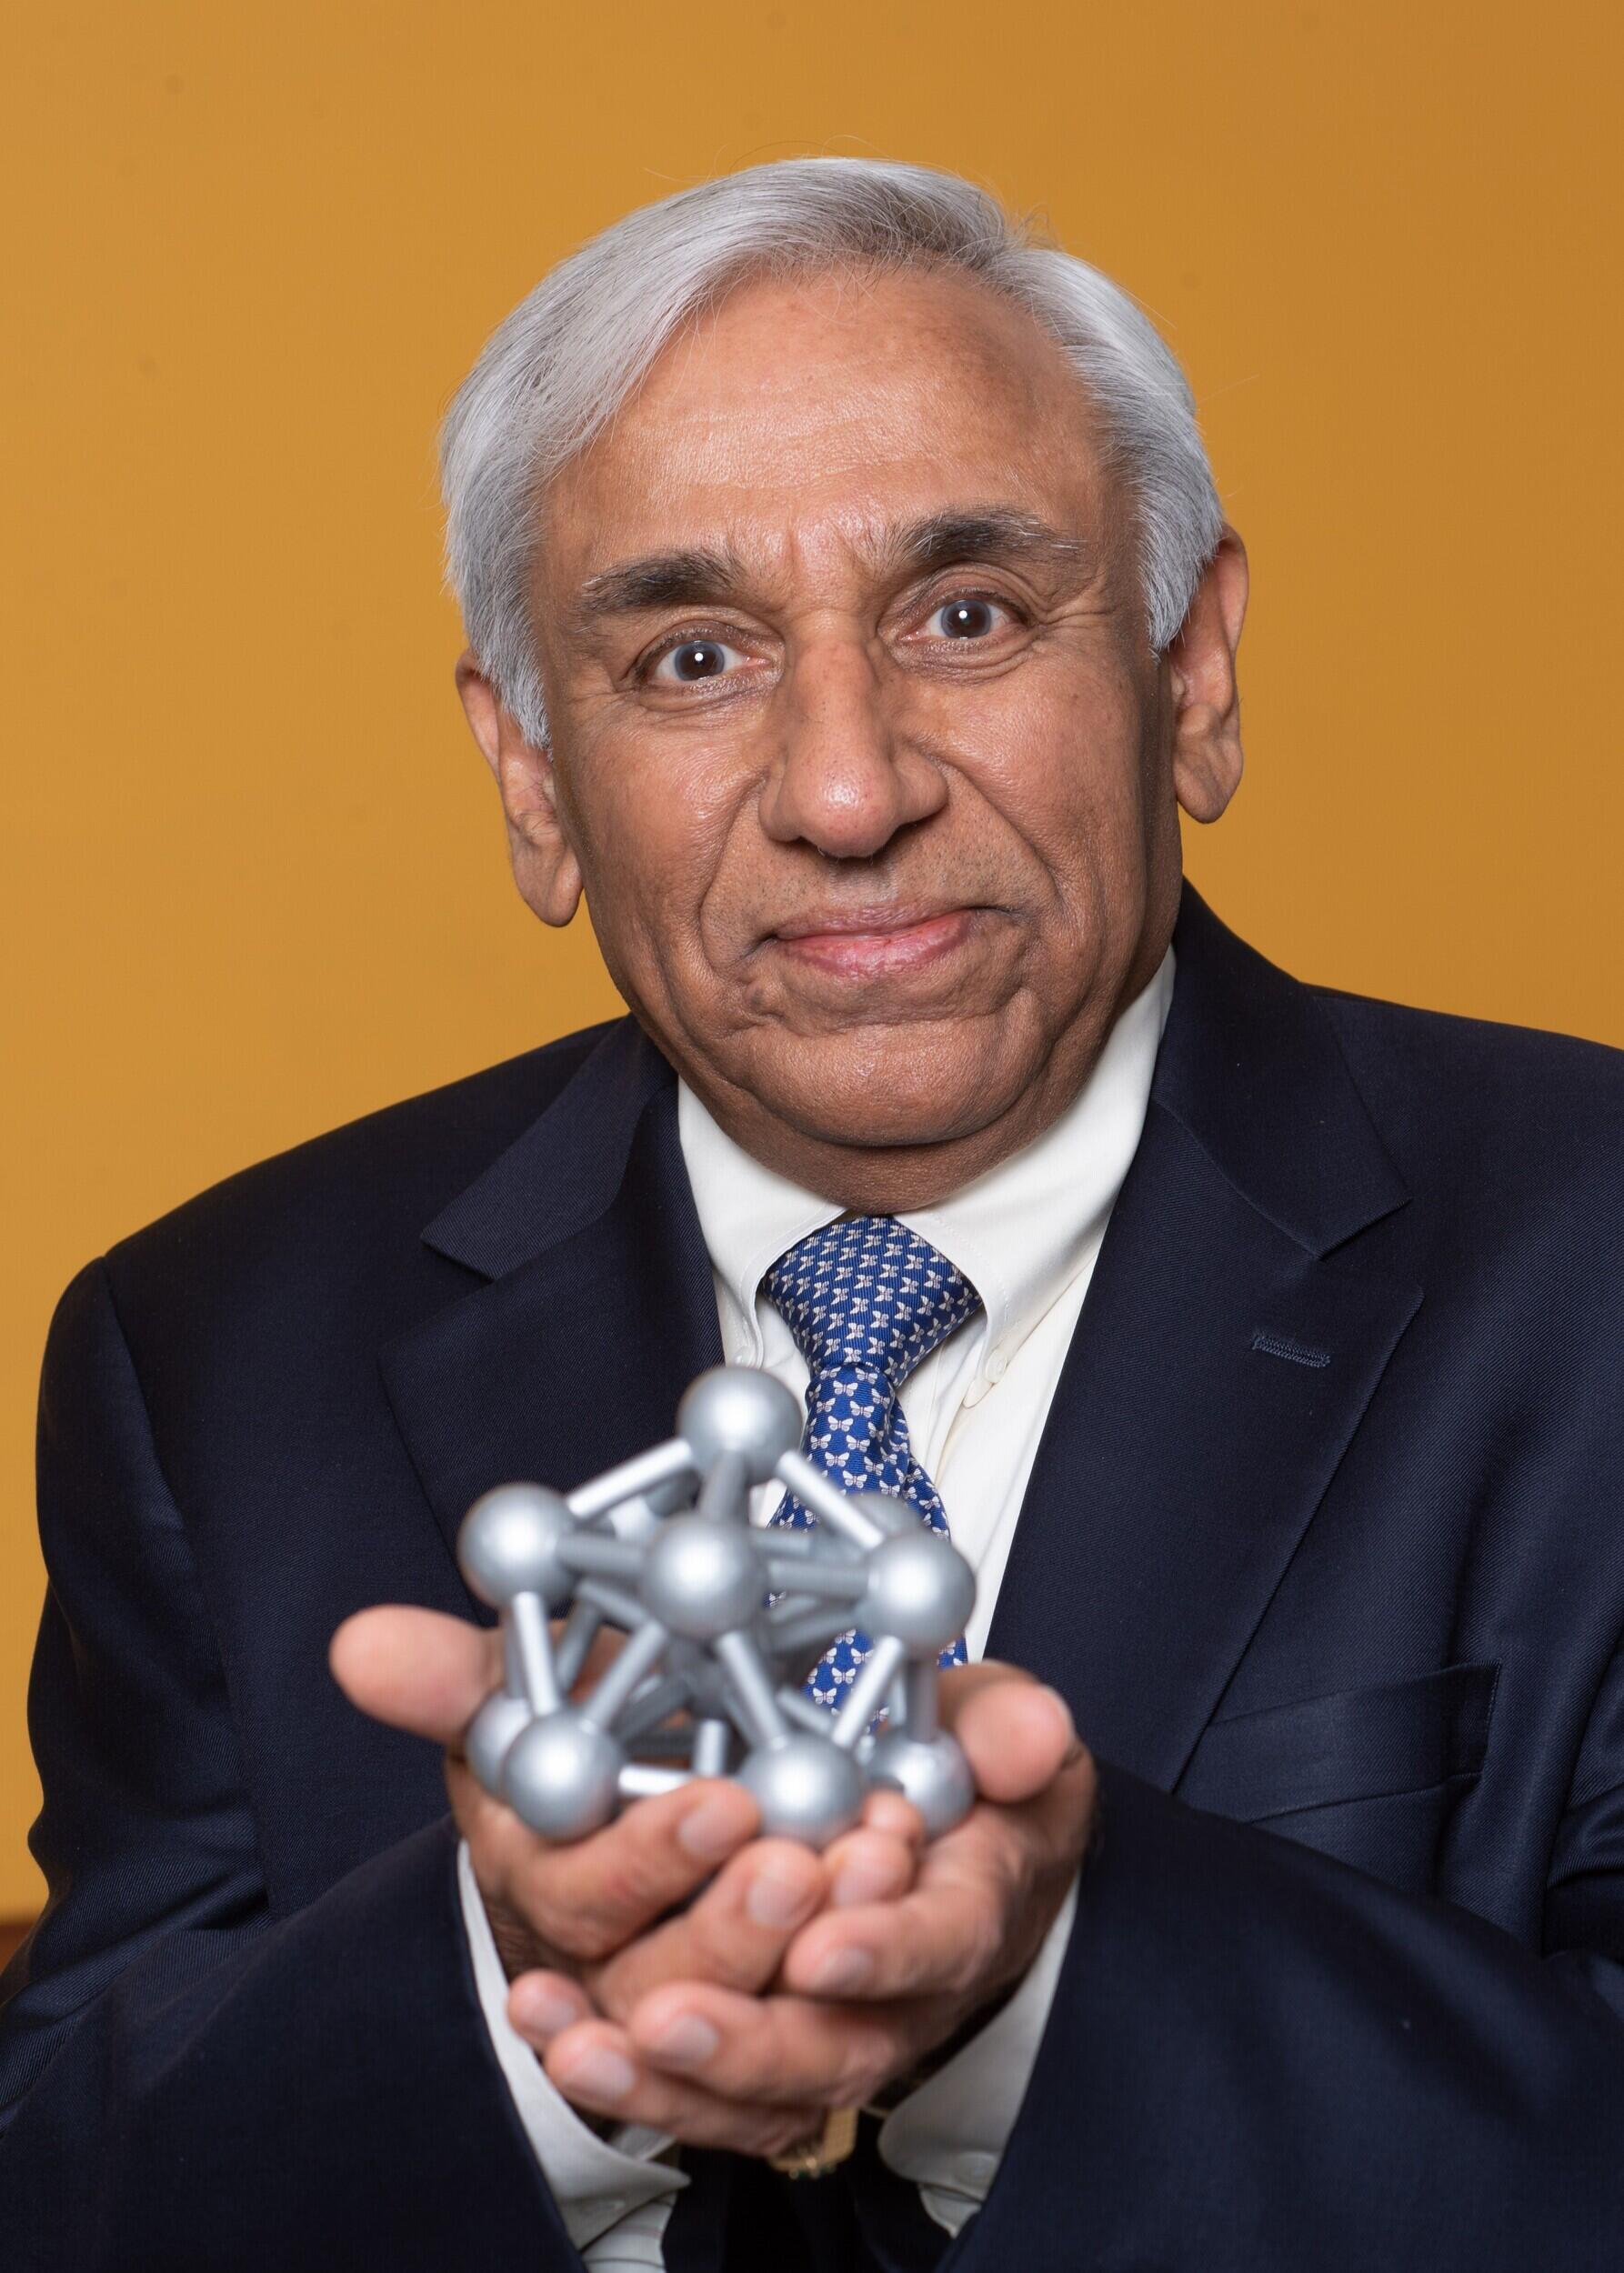 A photo of a man in a suit and tie holding a model of an atom. 